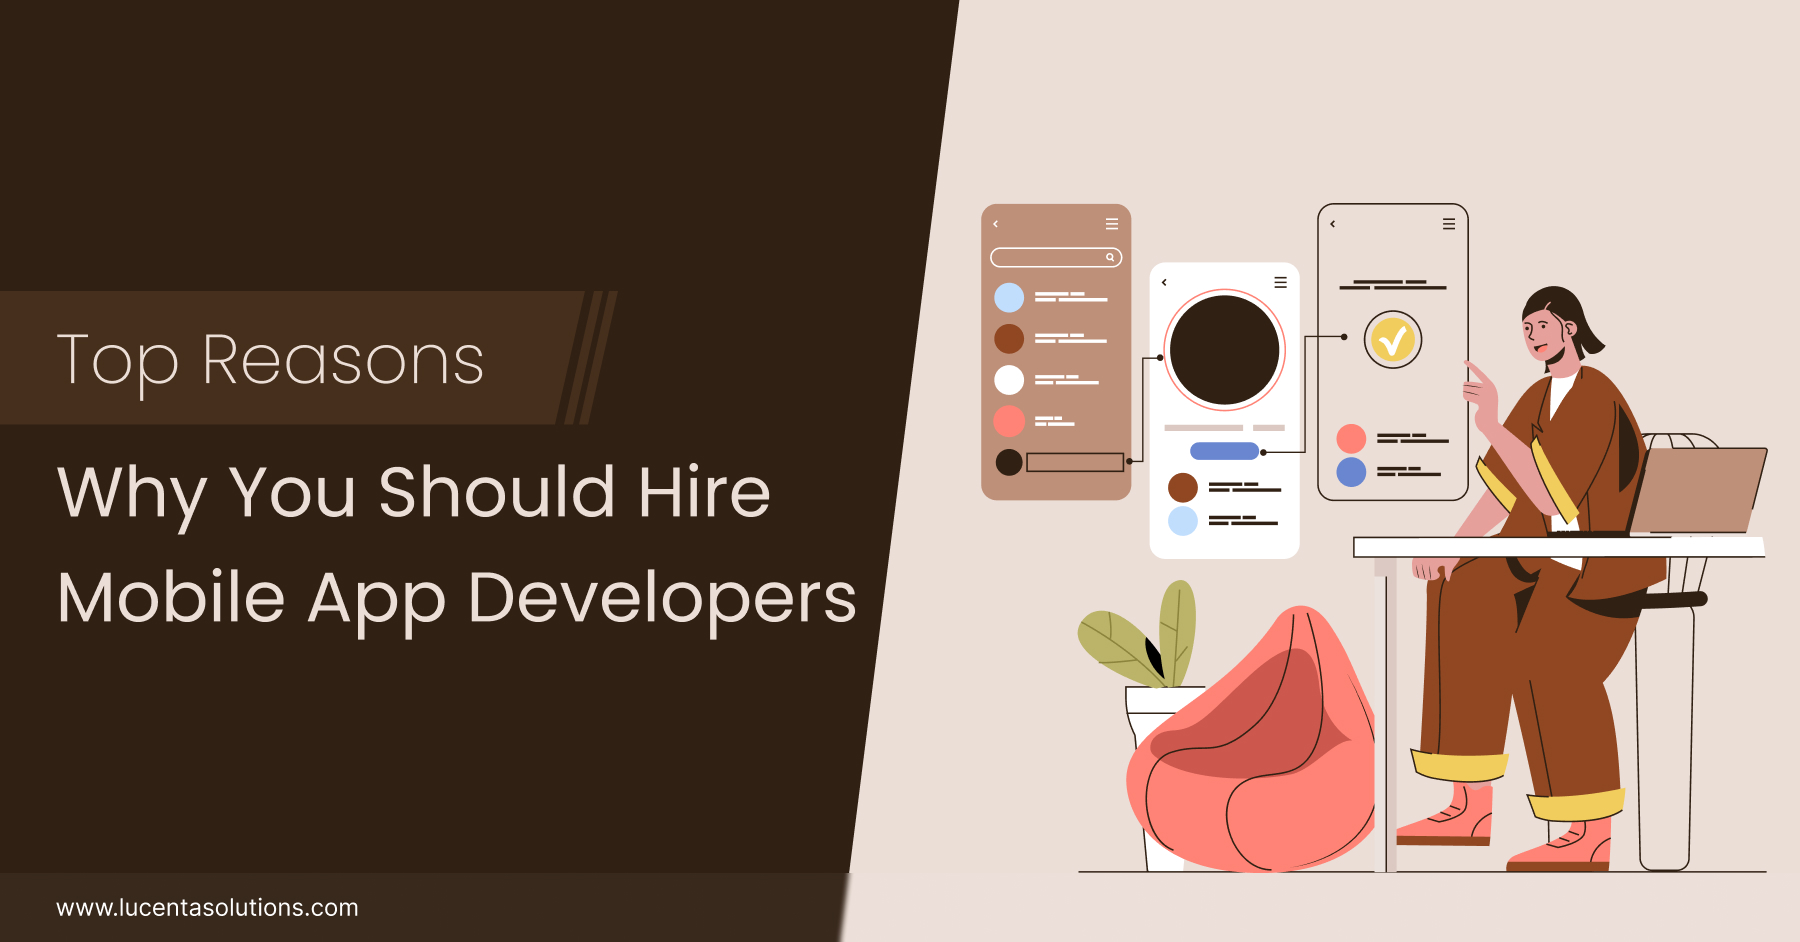 Top Reasons Why You Should Hire Mobile App Developers